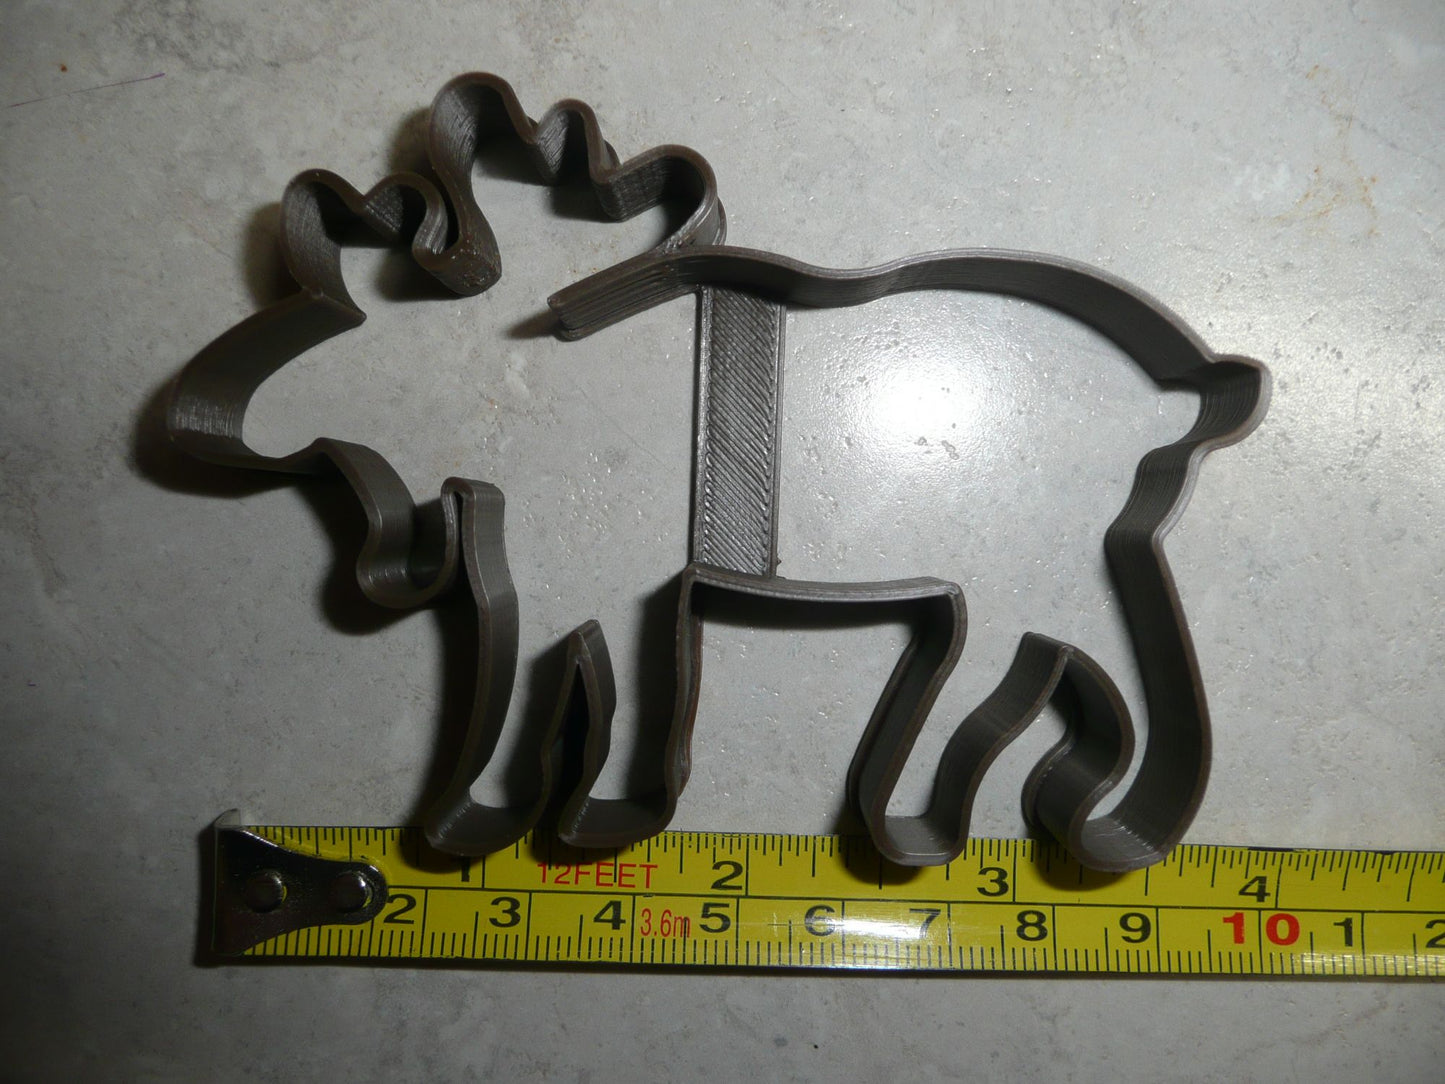 Moose Outline Winter Woodland Animal Cookie Cutter Made In USA PR94